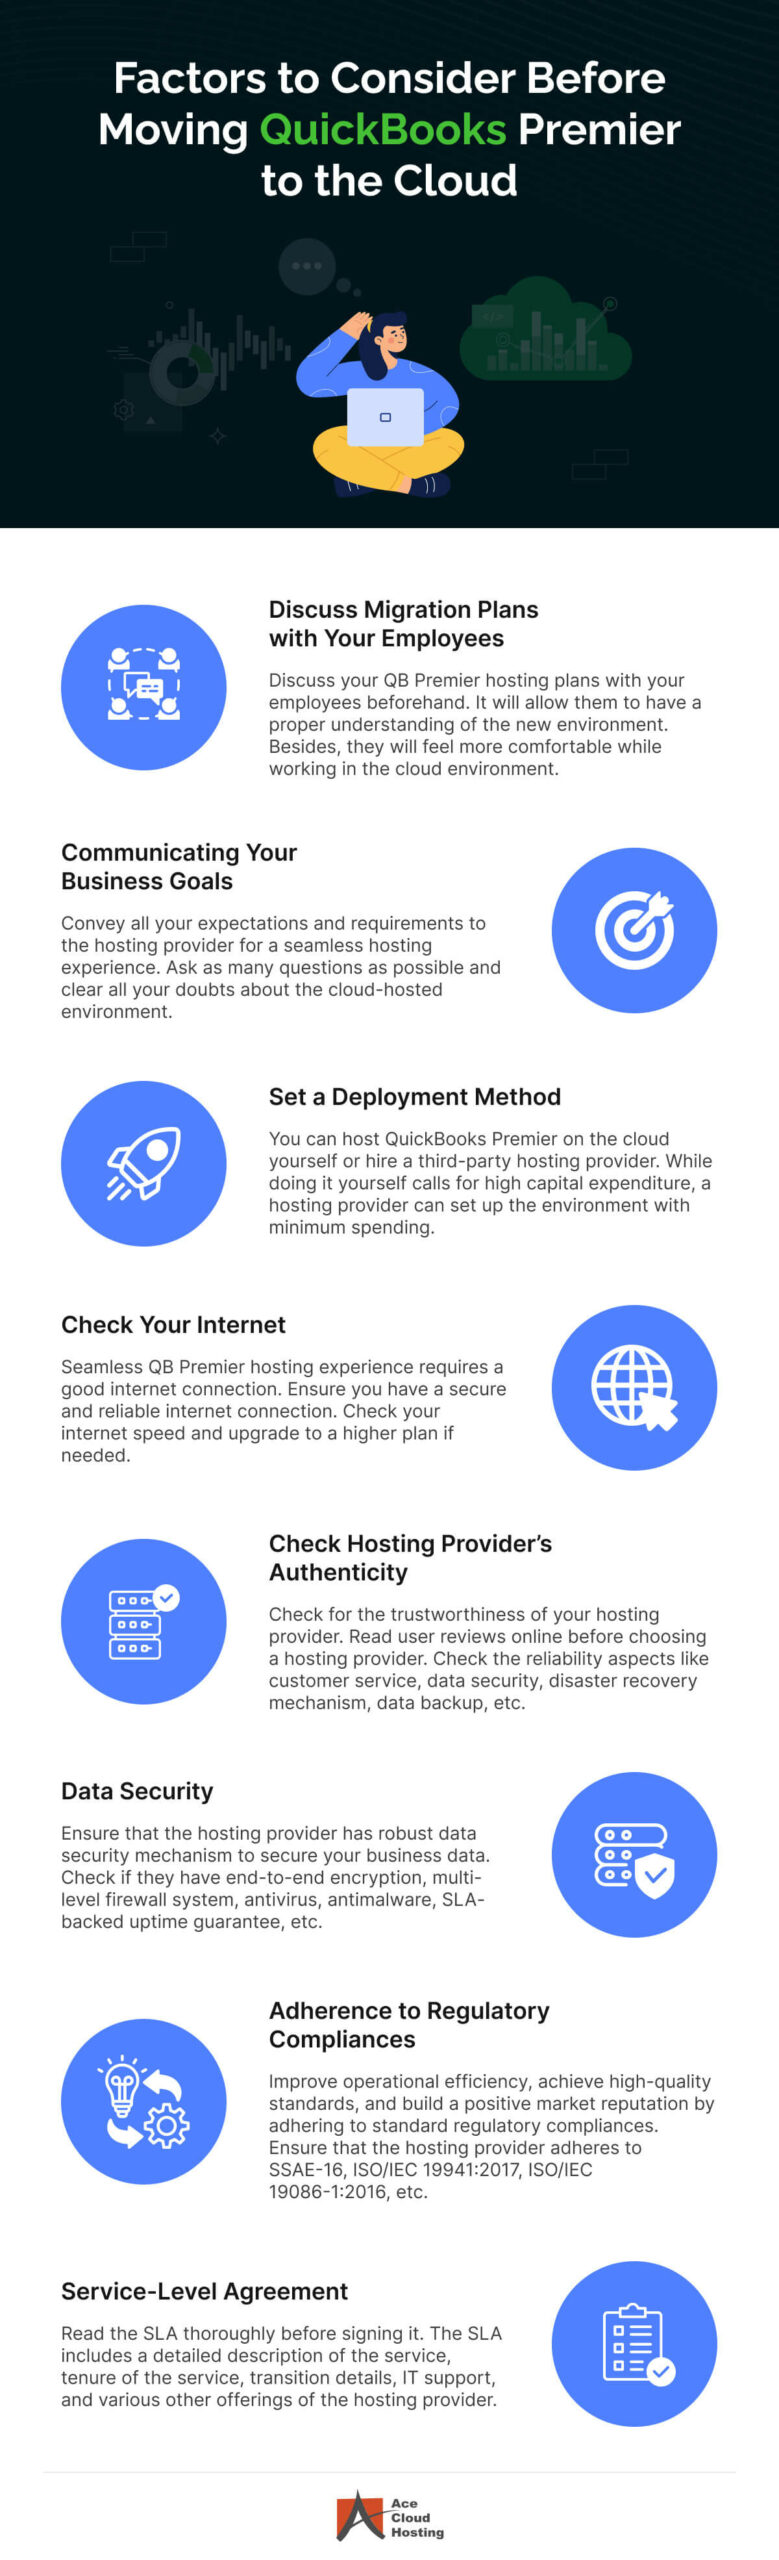 8-factors-to-consider-before-moving-quickbooks-premier-to-the-cloud-infographpic